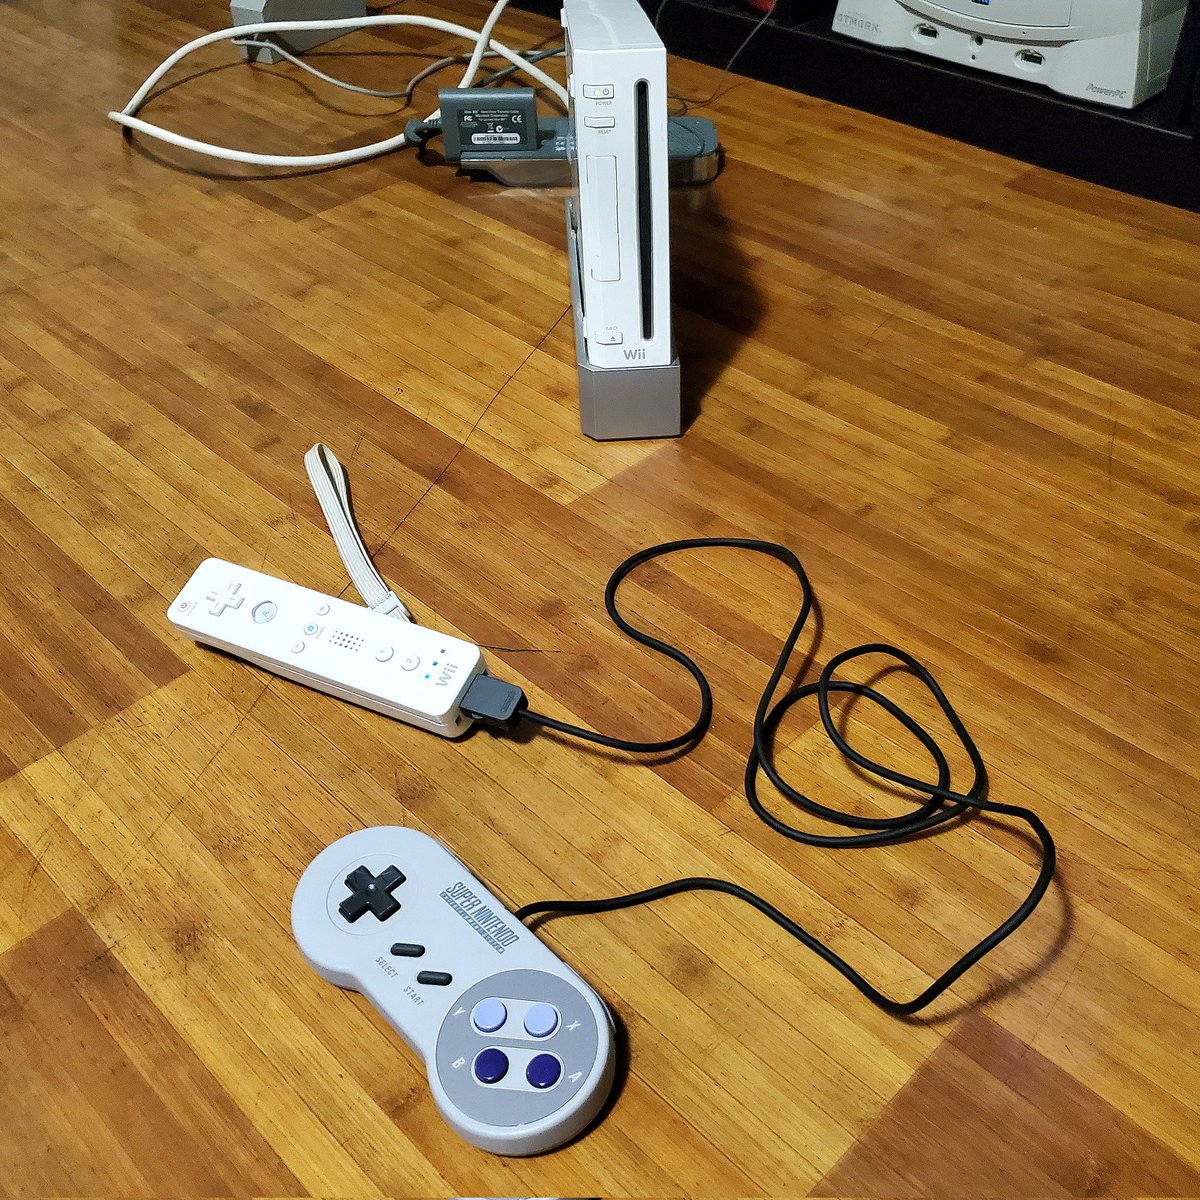 This is your periodic reminder / PSA that the controllers for the Super Nintendo Classic mini console are compatible with the Wii and make perfect controllers for playing SNES games on that platform!

#retrogaming #nintendo #retrocollector